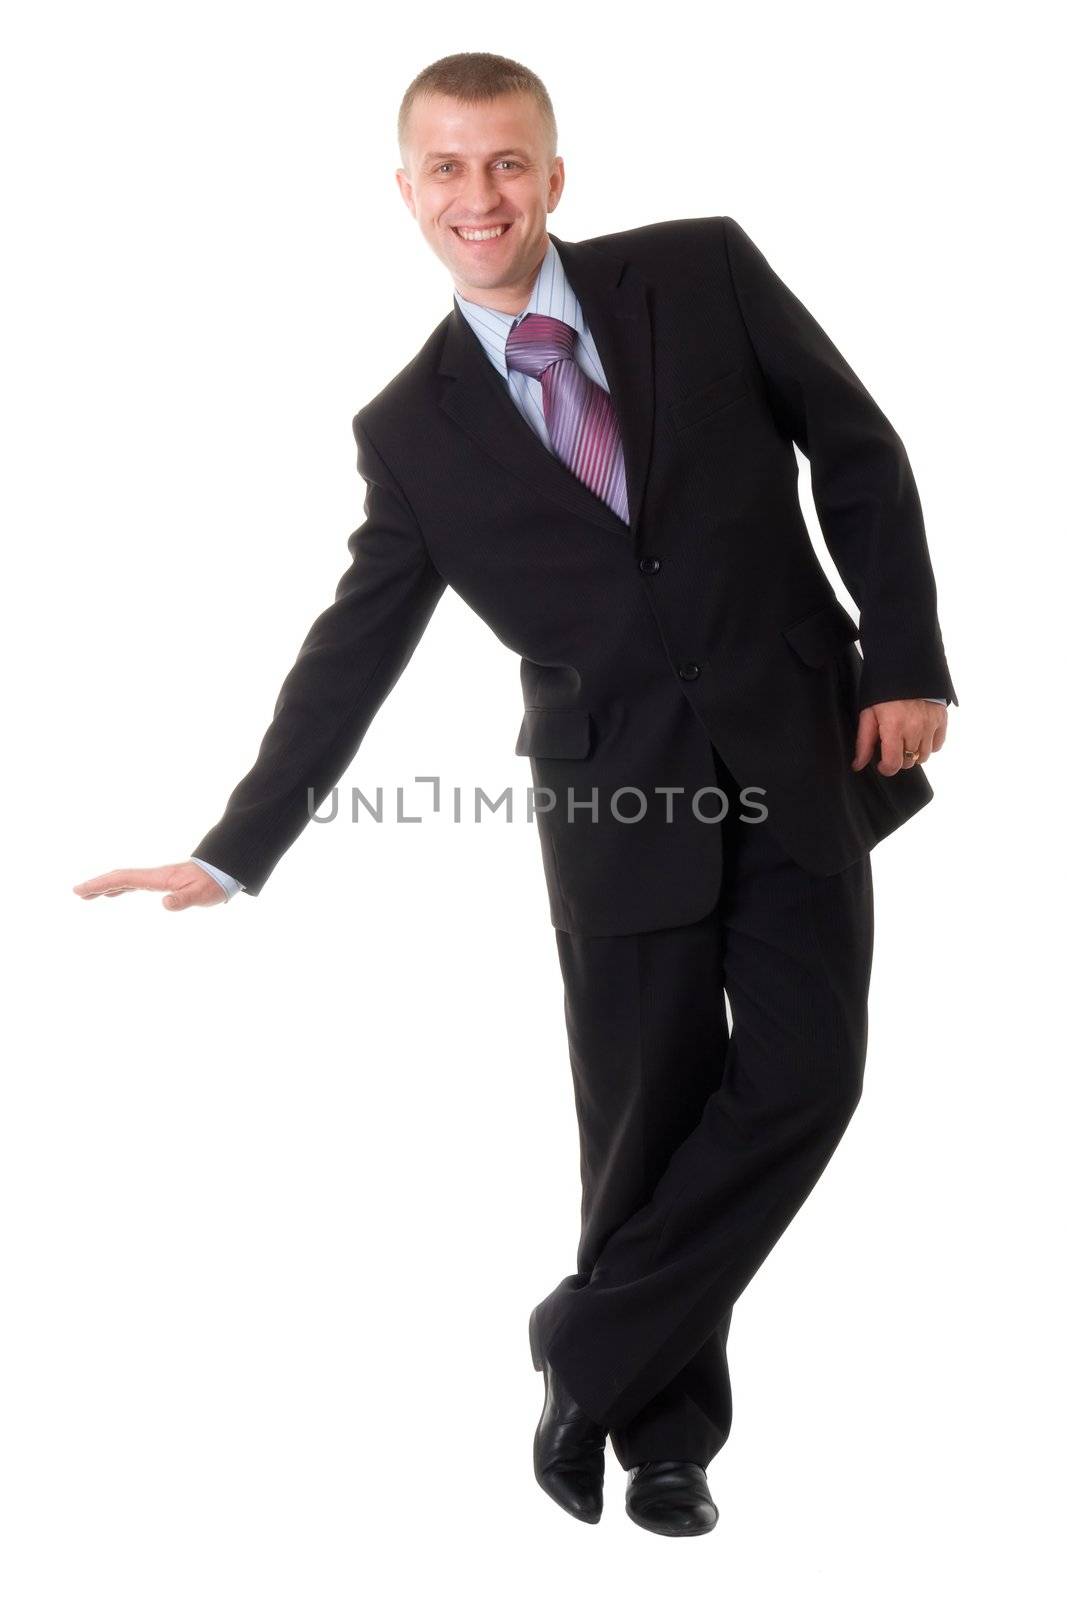 smiling young businessman standing against isolated white background